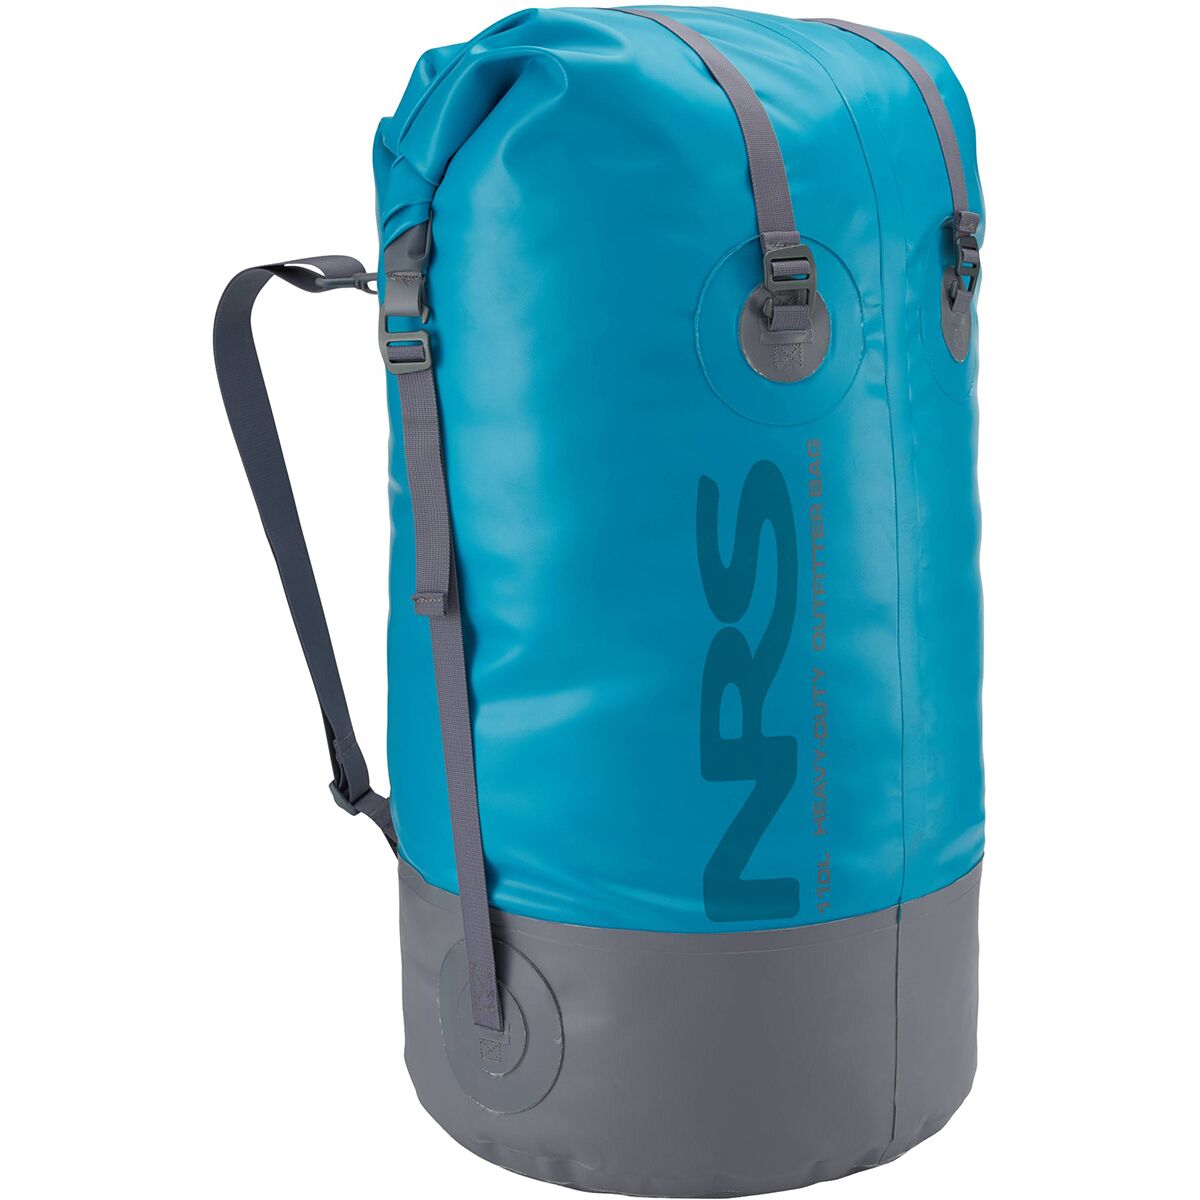 Heavy-Duty Outfitter Dry Bag